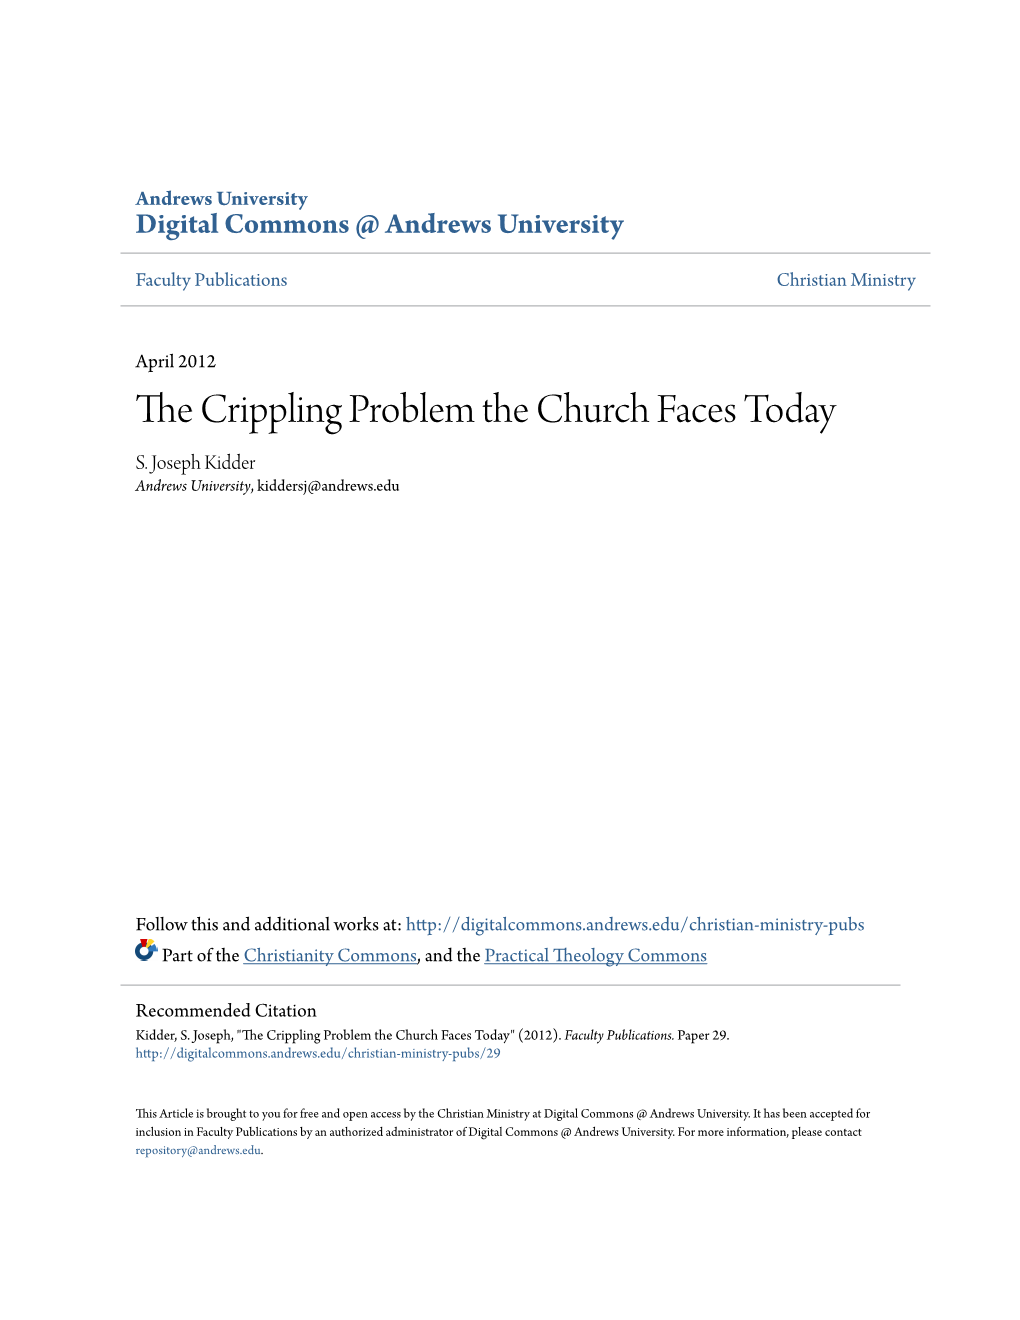 The Crippling Problem the Church Faces Today